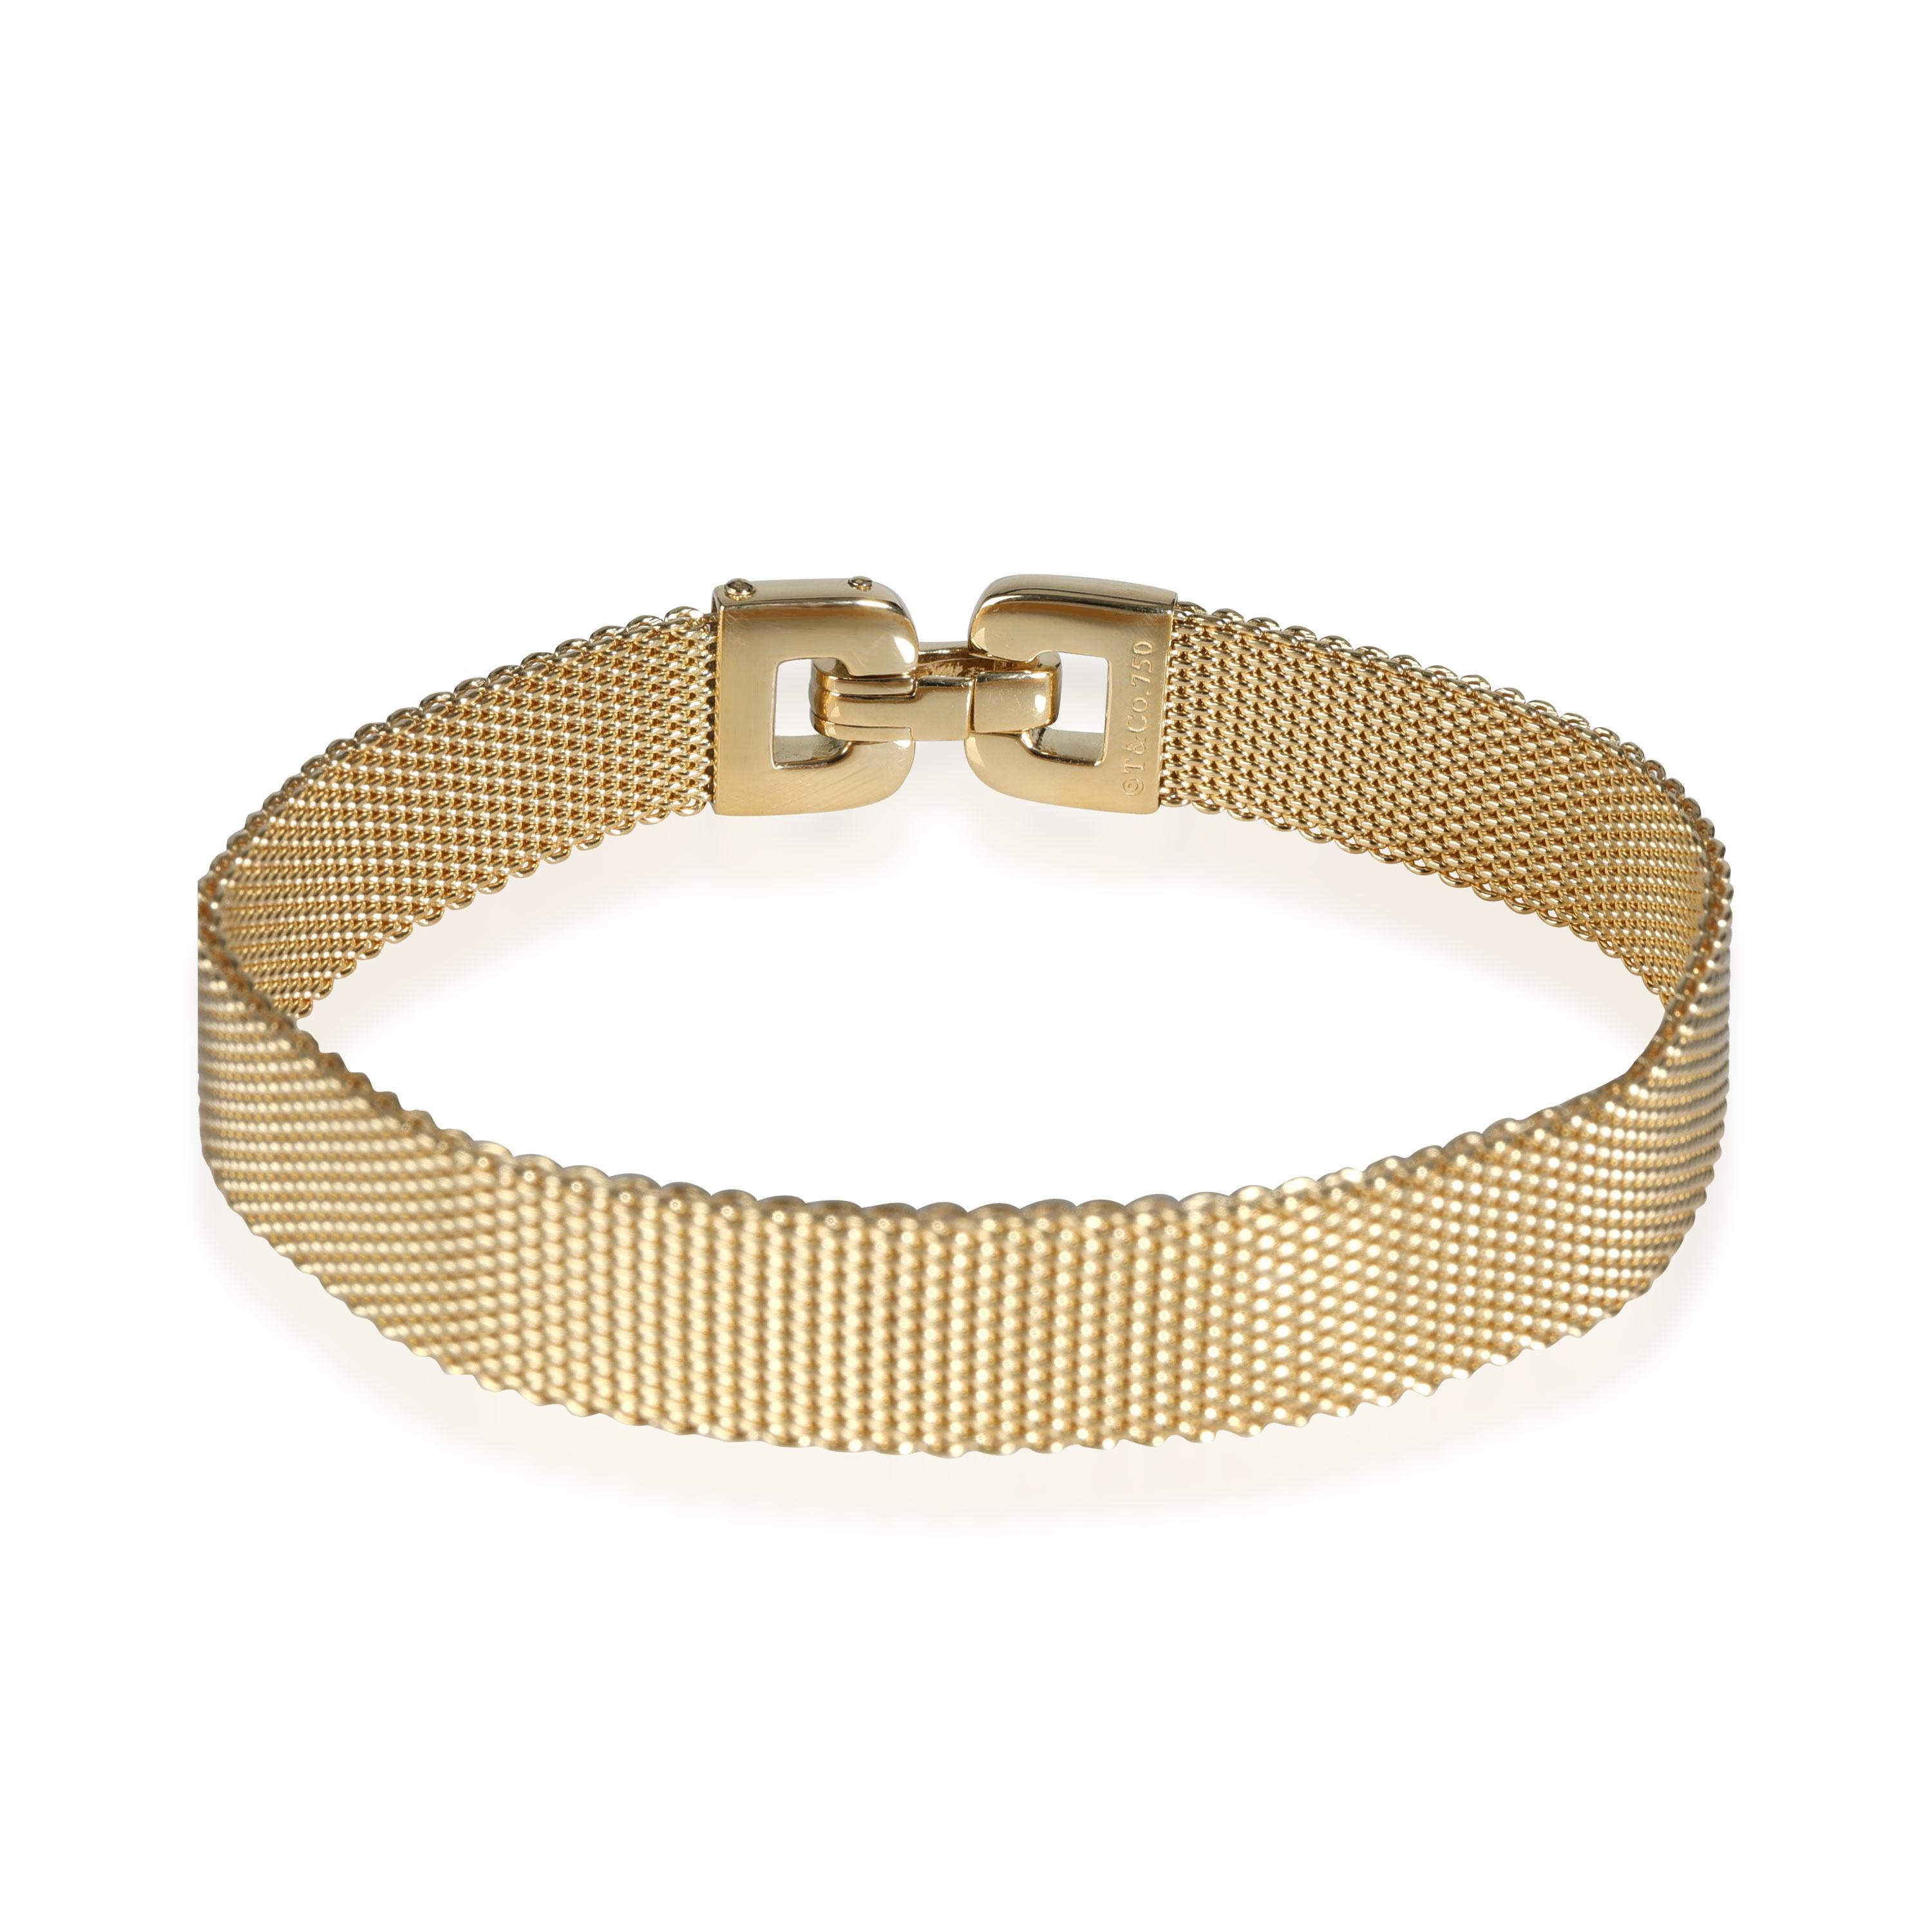 Tiffany & Co. Narrow Mesh Bracelet in 18K Yellow Gold

PRIMARY DETAILS
SKU: 111782
Listing Title: Tiffany & Co. Narrow Mesh Bracelet in 18K Yellow Gold
Condition Description: Retails for 5000 USD. In excellent condition and recently polished. 6.5